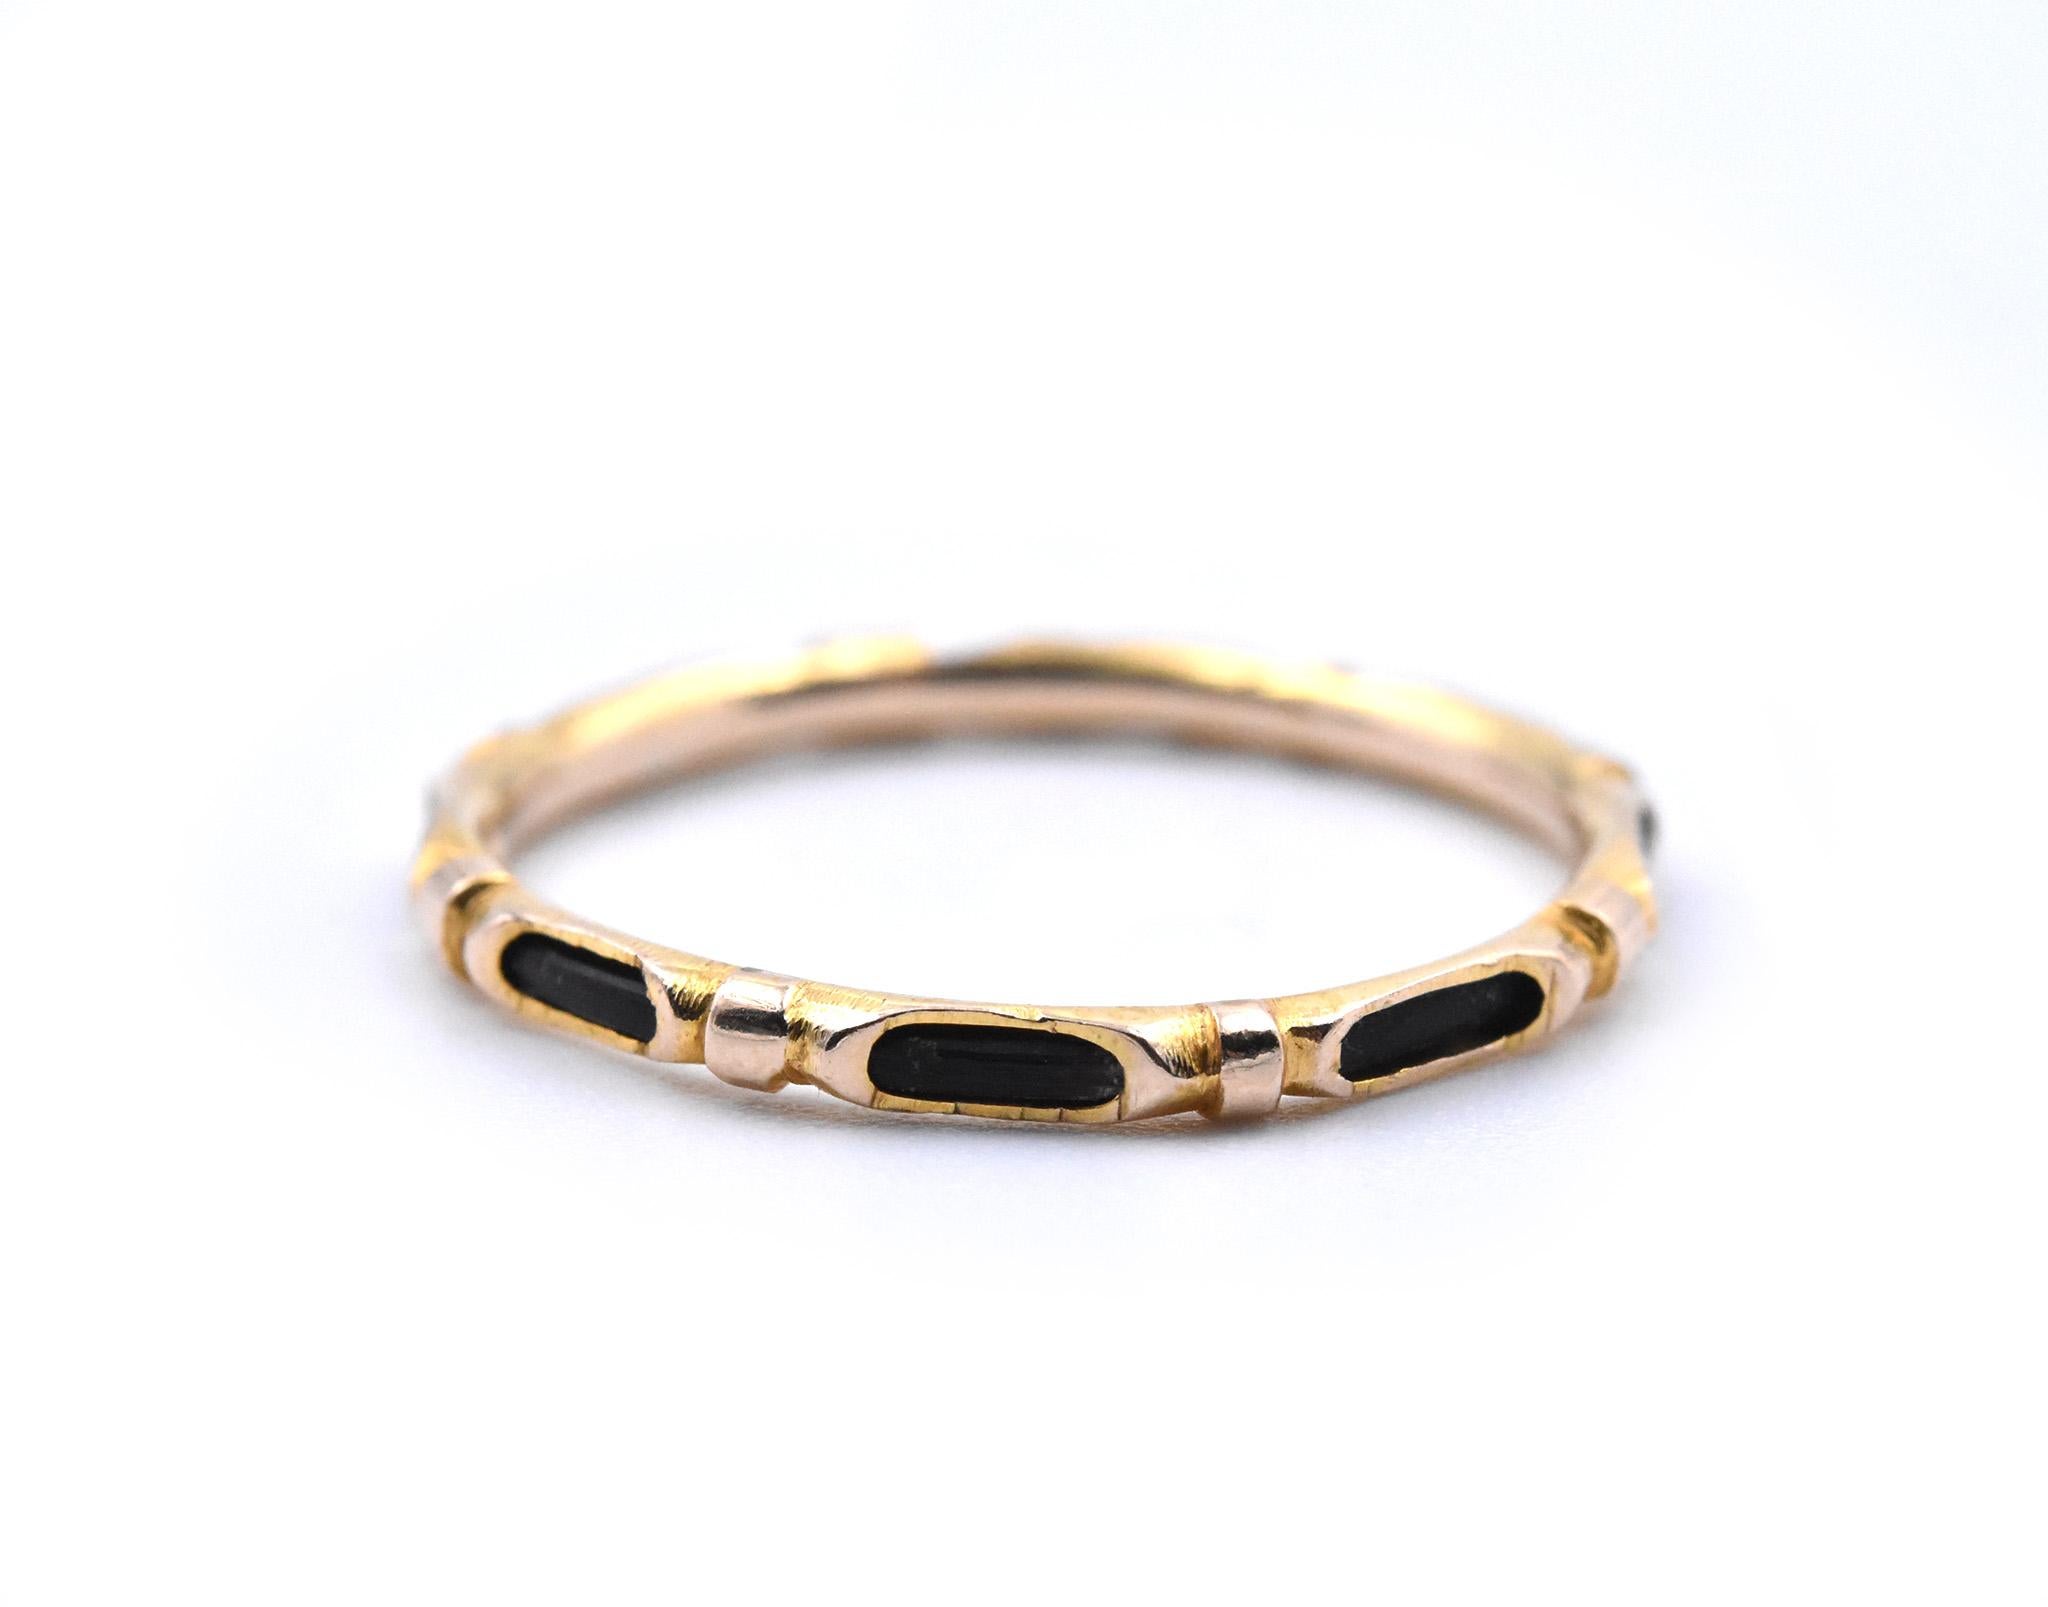 Designer: custom design
Material: 14k yellow gold
Ring Size: 6 ½ (ring cannot be sized up)
Weight: 0.65 grams
